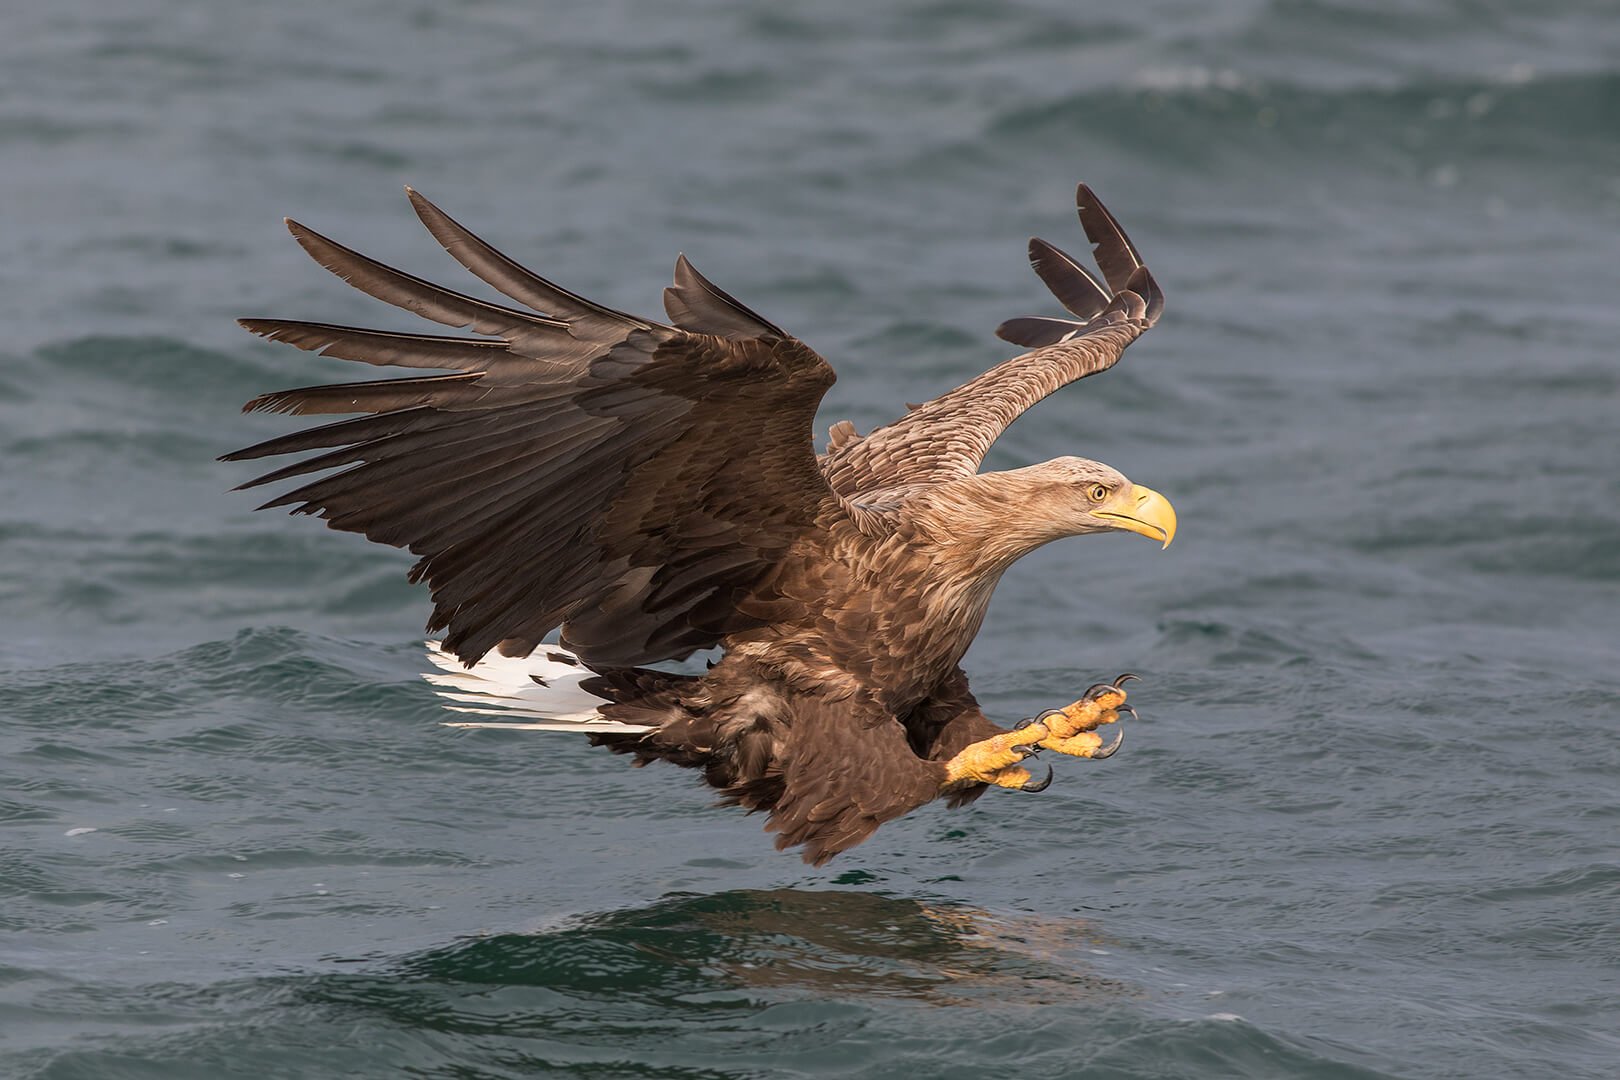 White-tailed sea eagle swooping for fish photographed on Natural World Photography Otters and Eagles wildlife photography tour to Mull